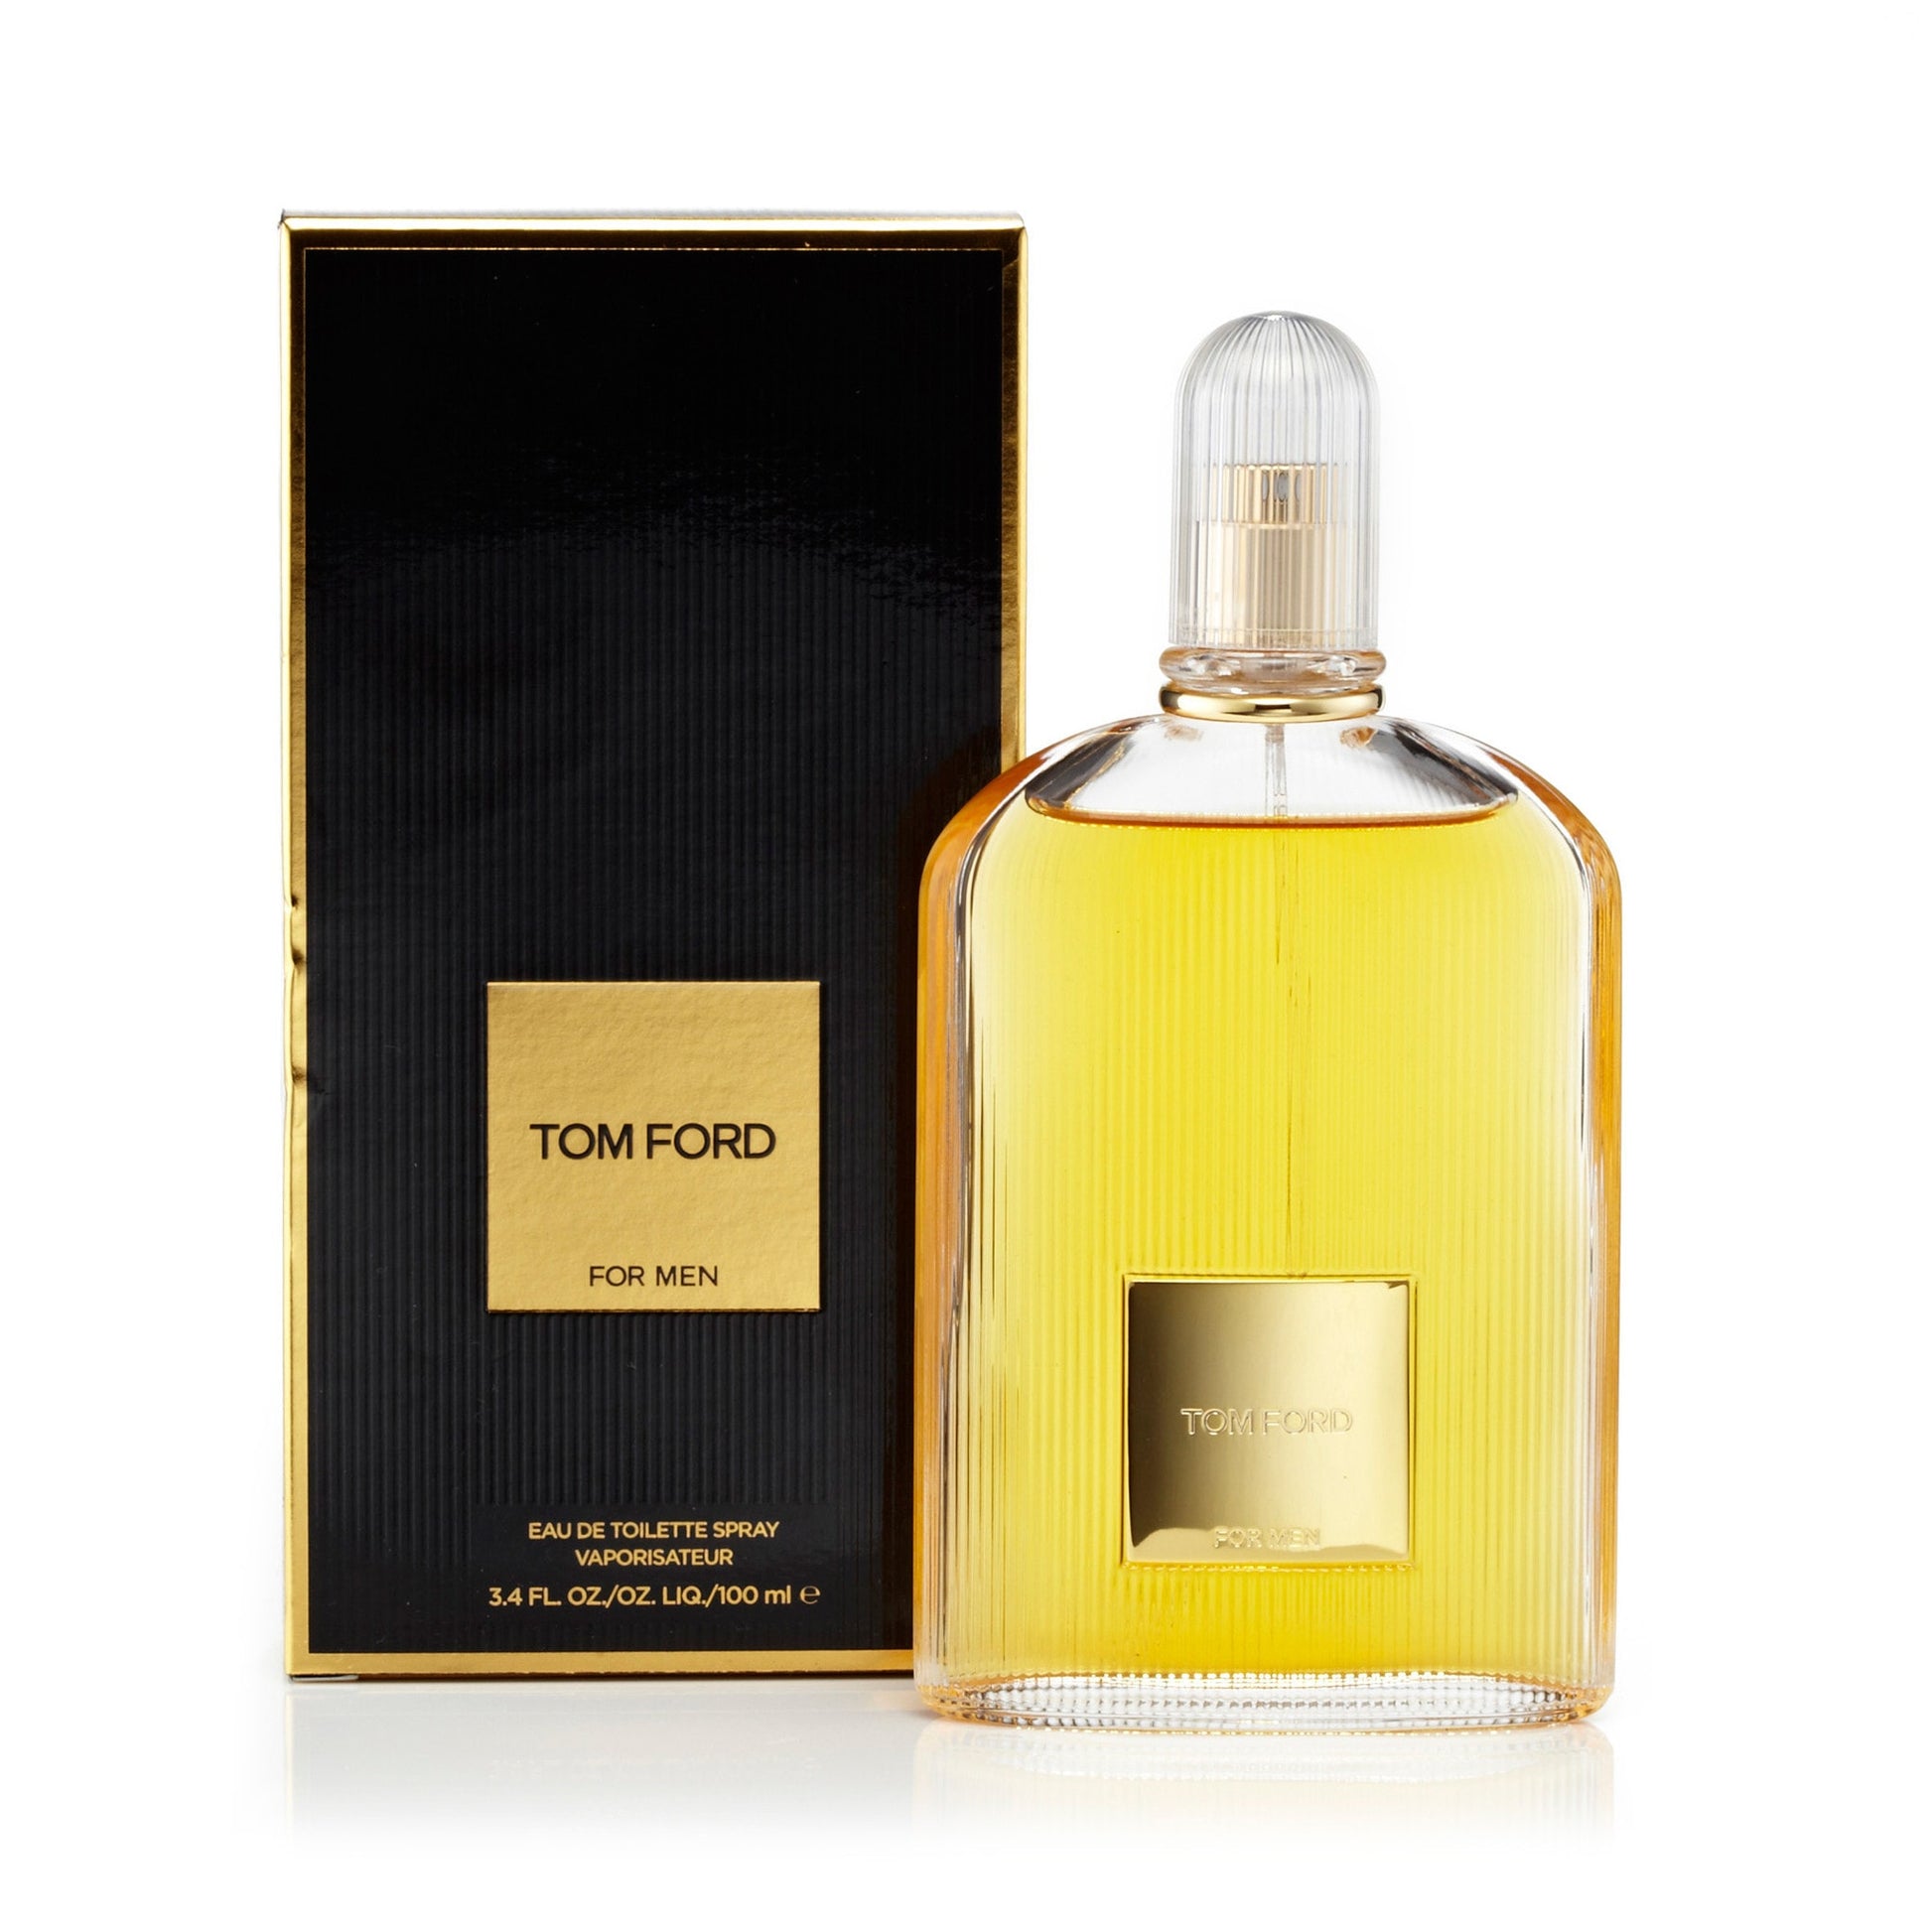 Tom Ford Eau de Toilette Spray for Men by Tom Ford, Product image 1